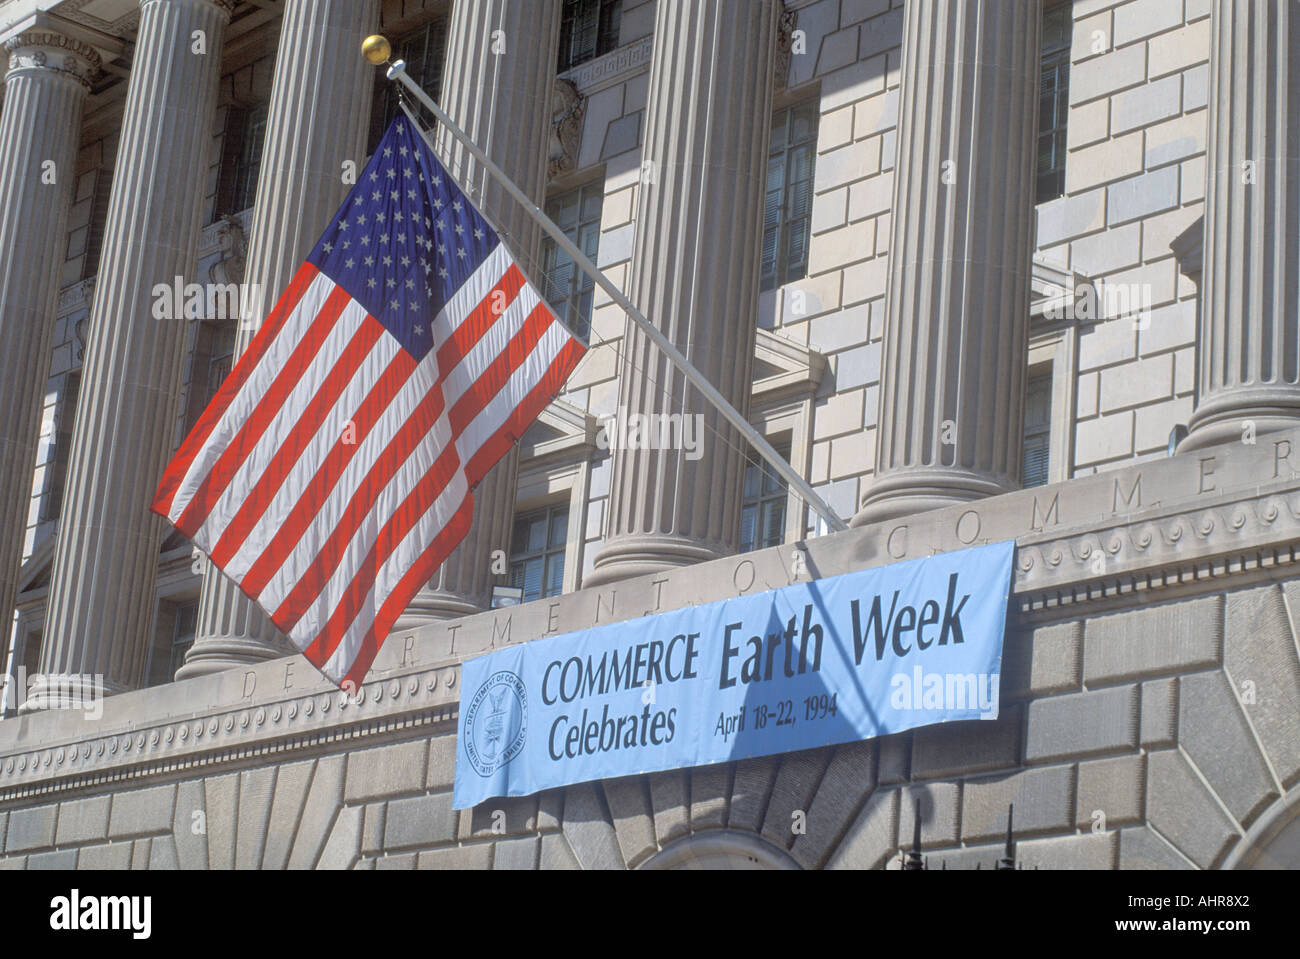 A sign indicating the celebration of Earth Week at The Department of Commerce in Washington D C Stock Photo